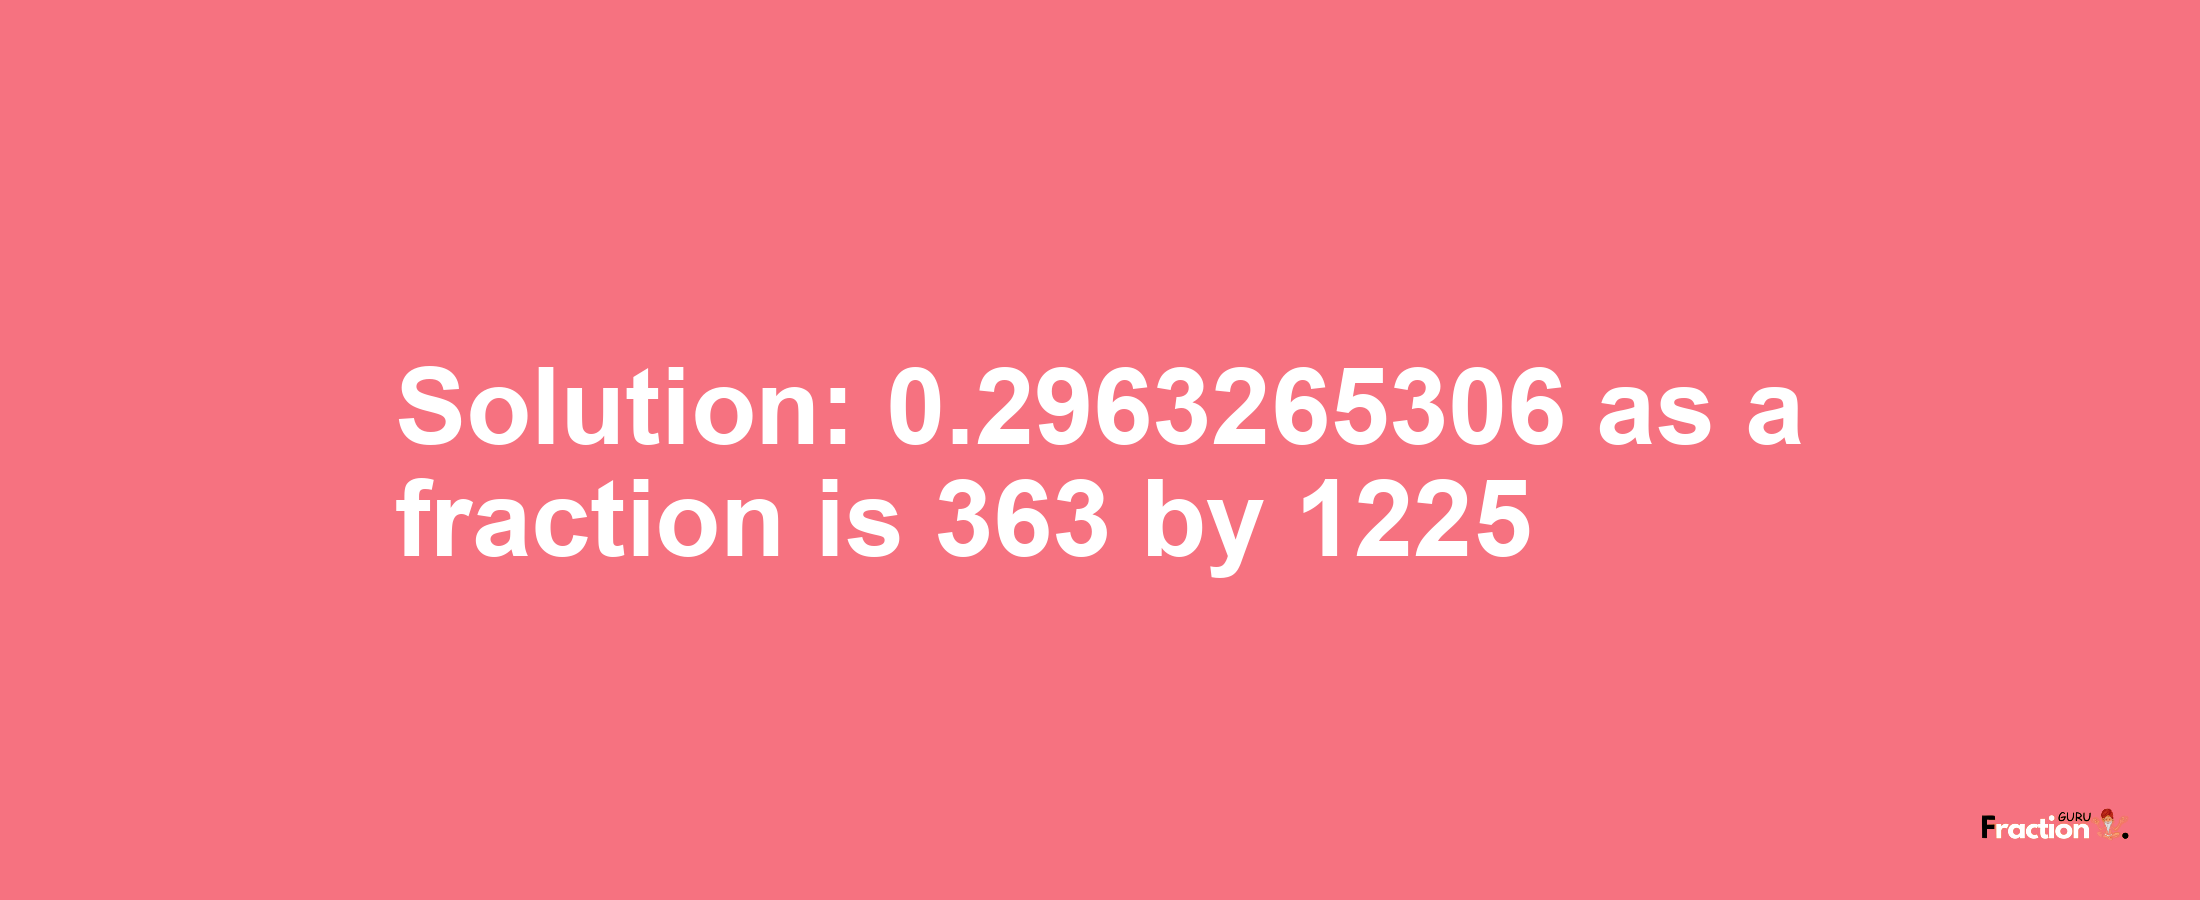 Solution:0.2963265306 as a fraction is 363/1225